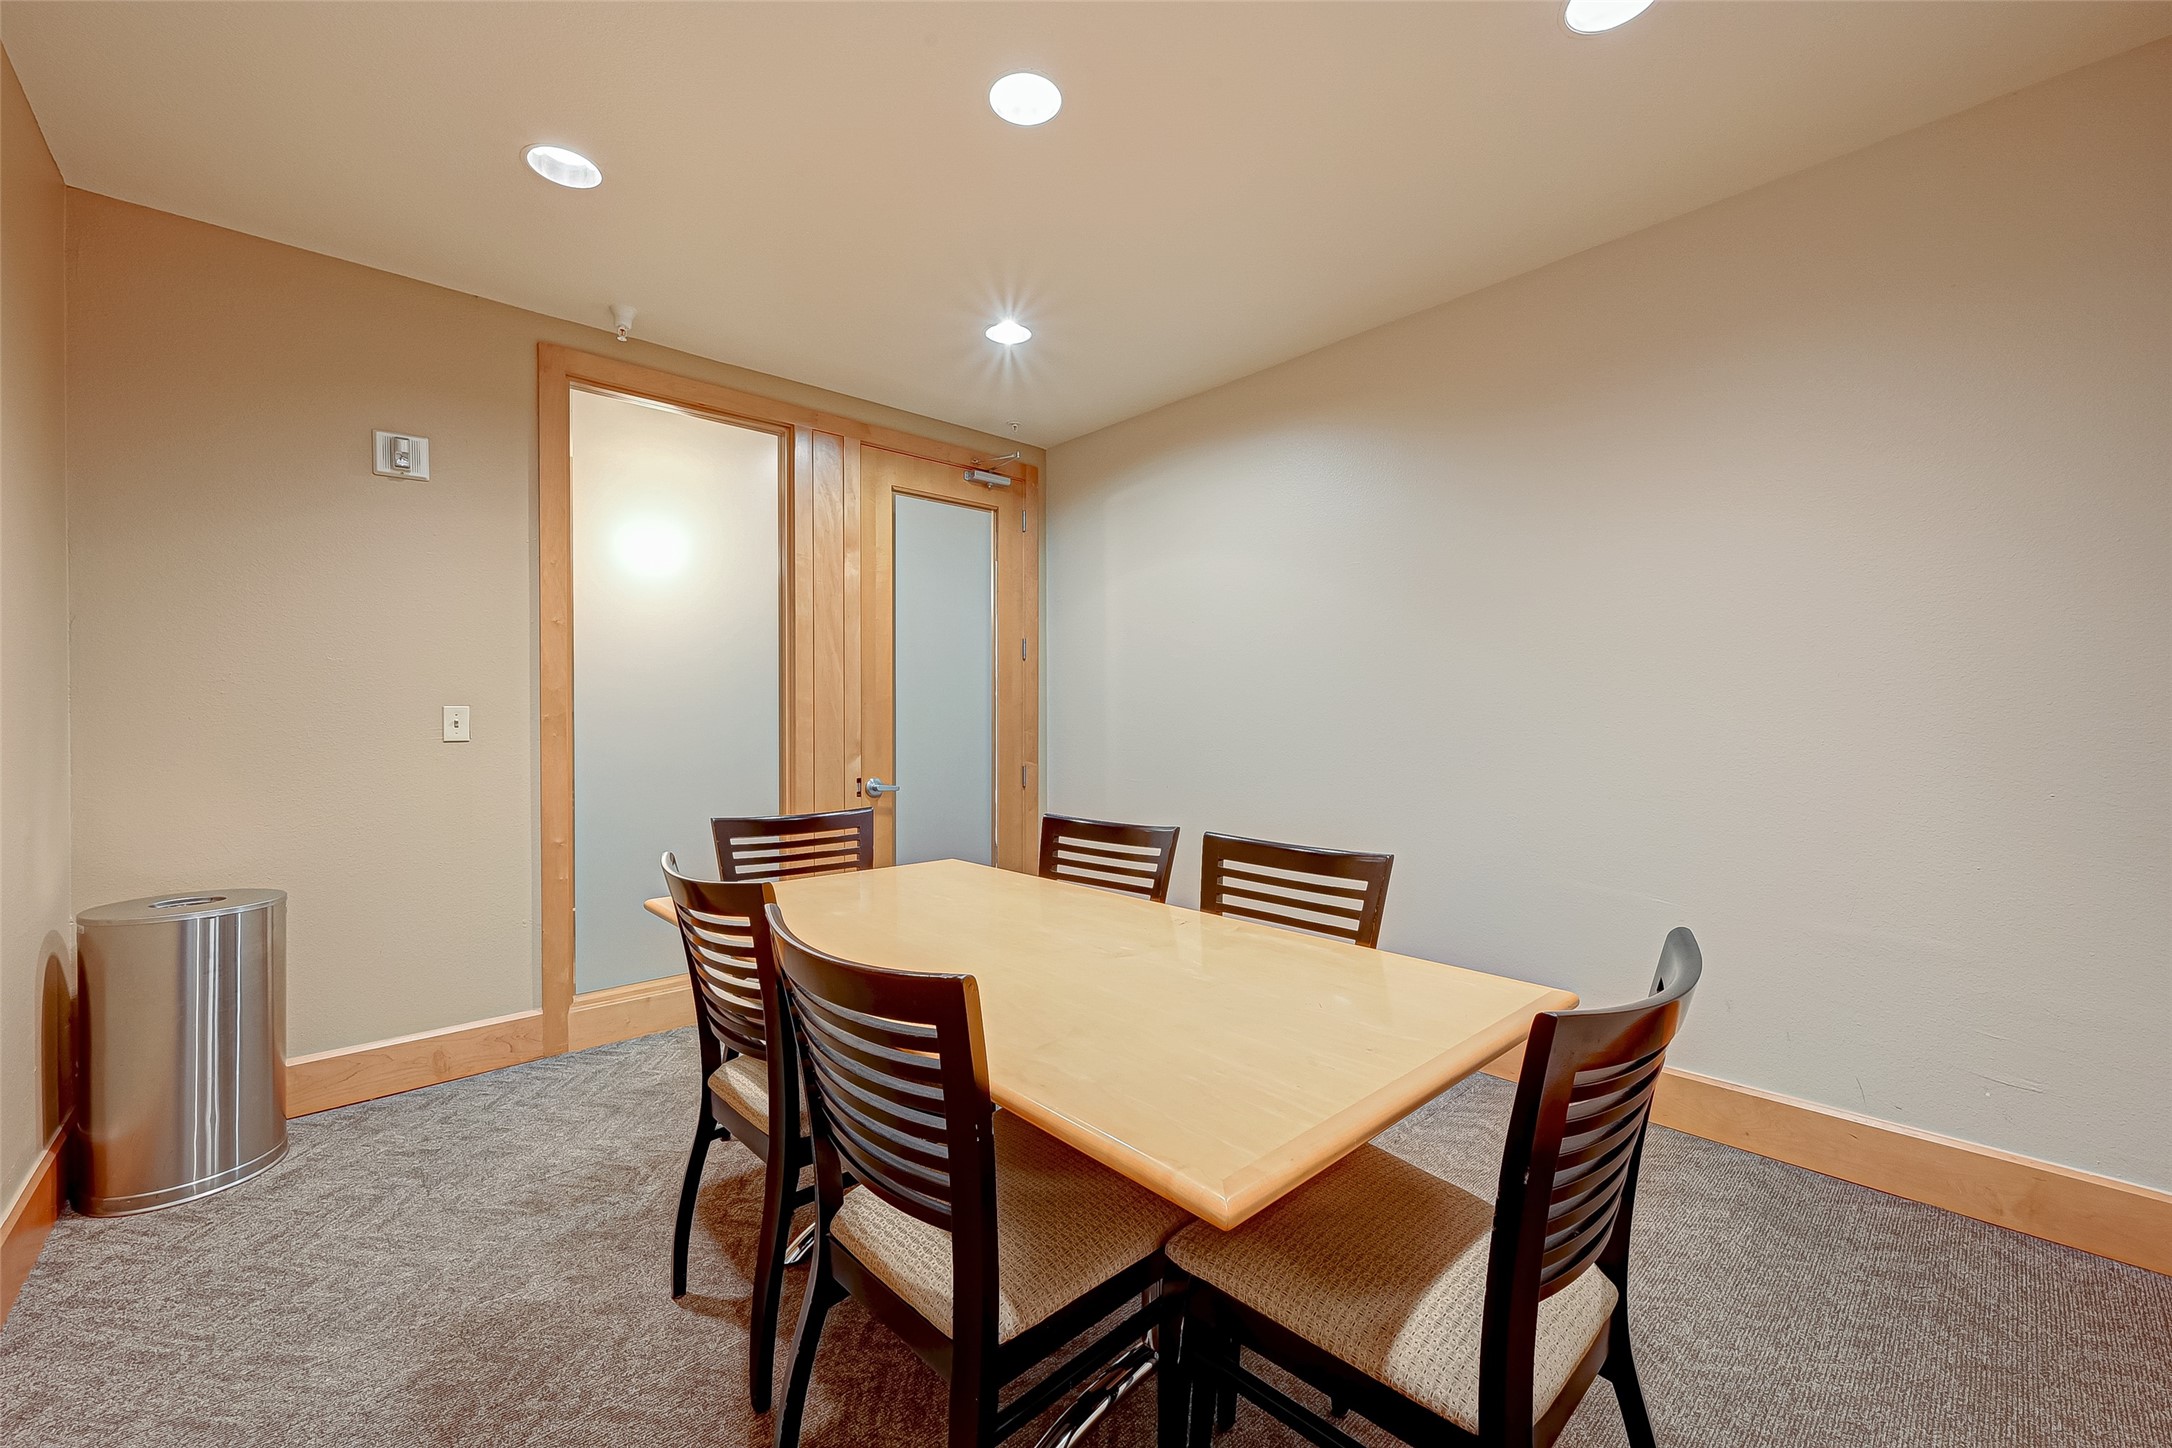 Next door to working space is a small conference area for private meetings.